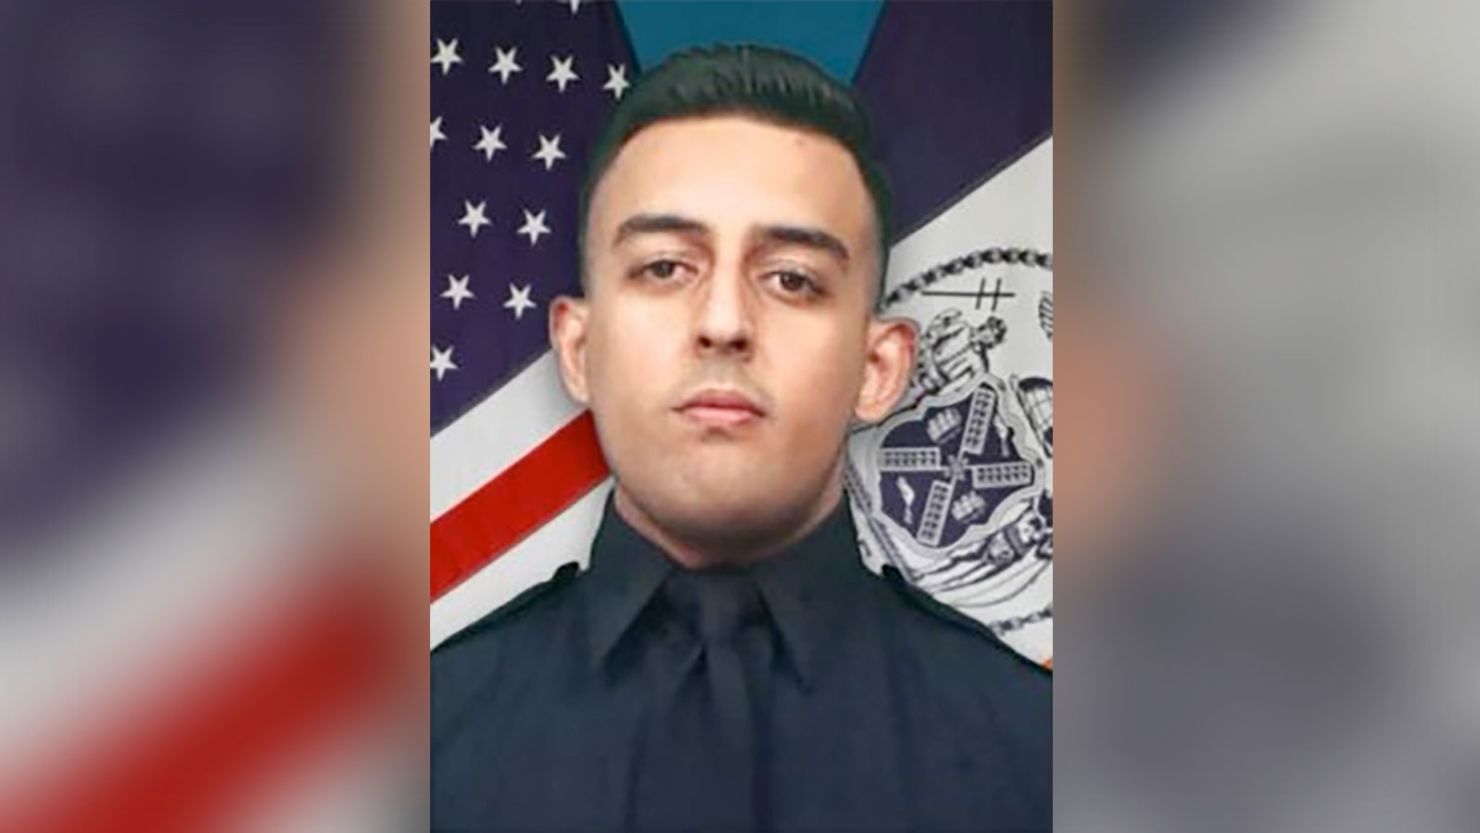 New York police Officer Adeed Fayaz was off duty and trying to buy an SUV when he was shot Saturday, authorities said.